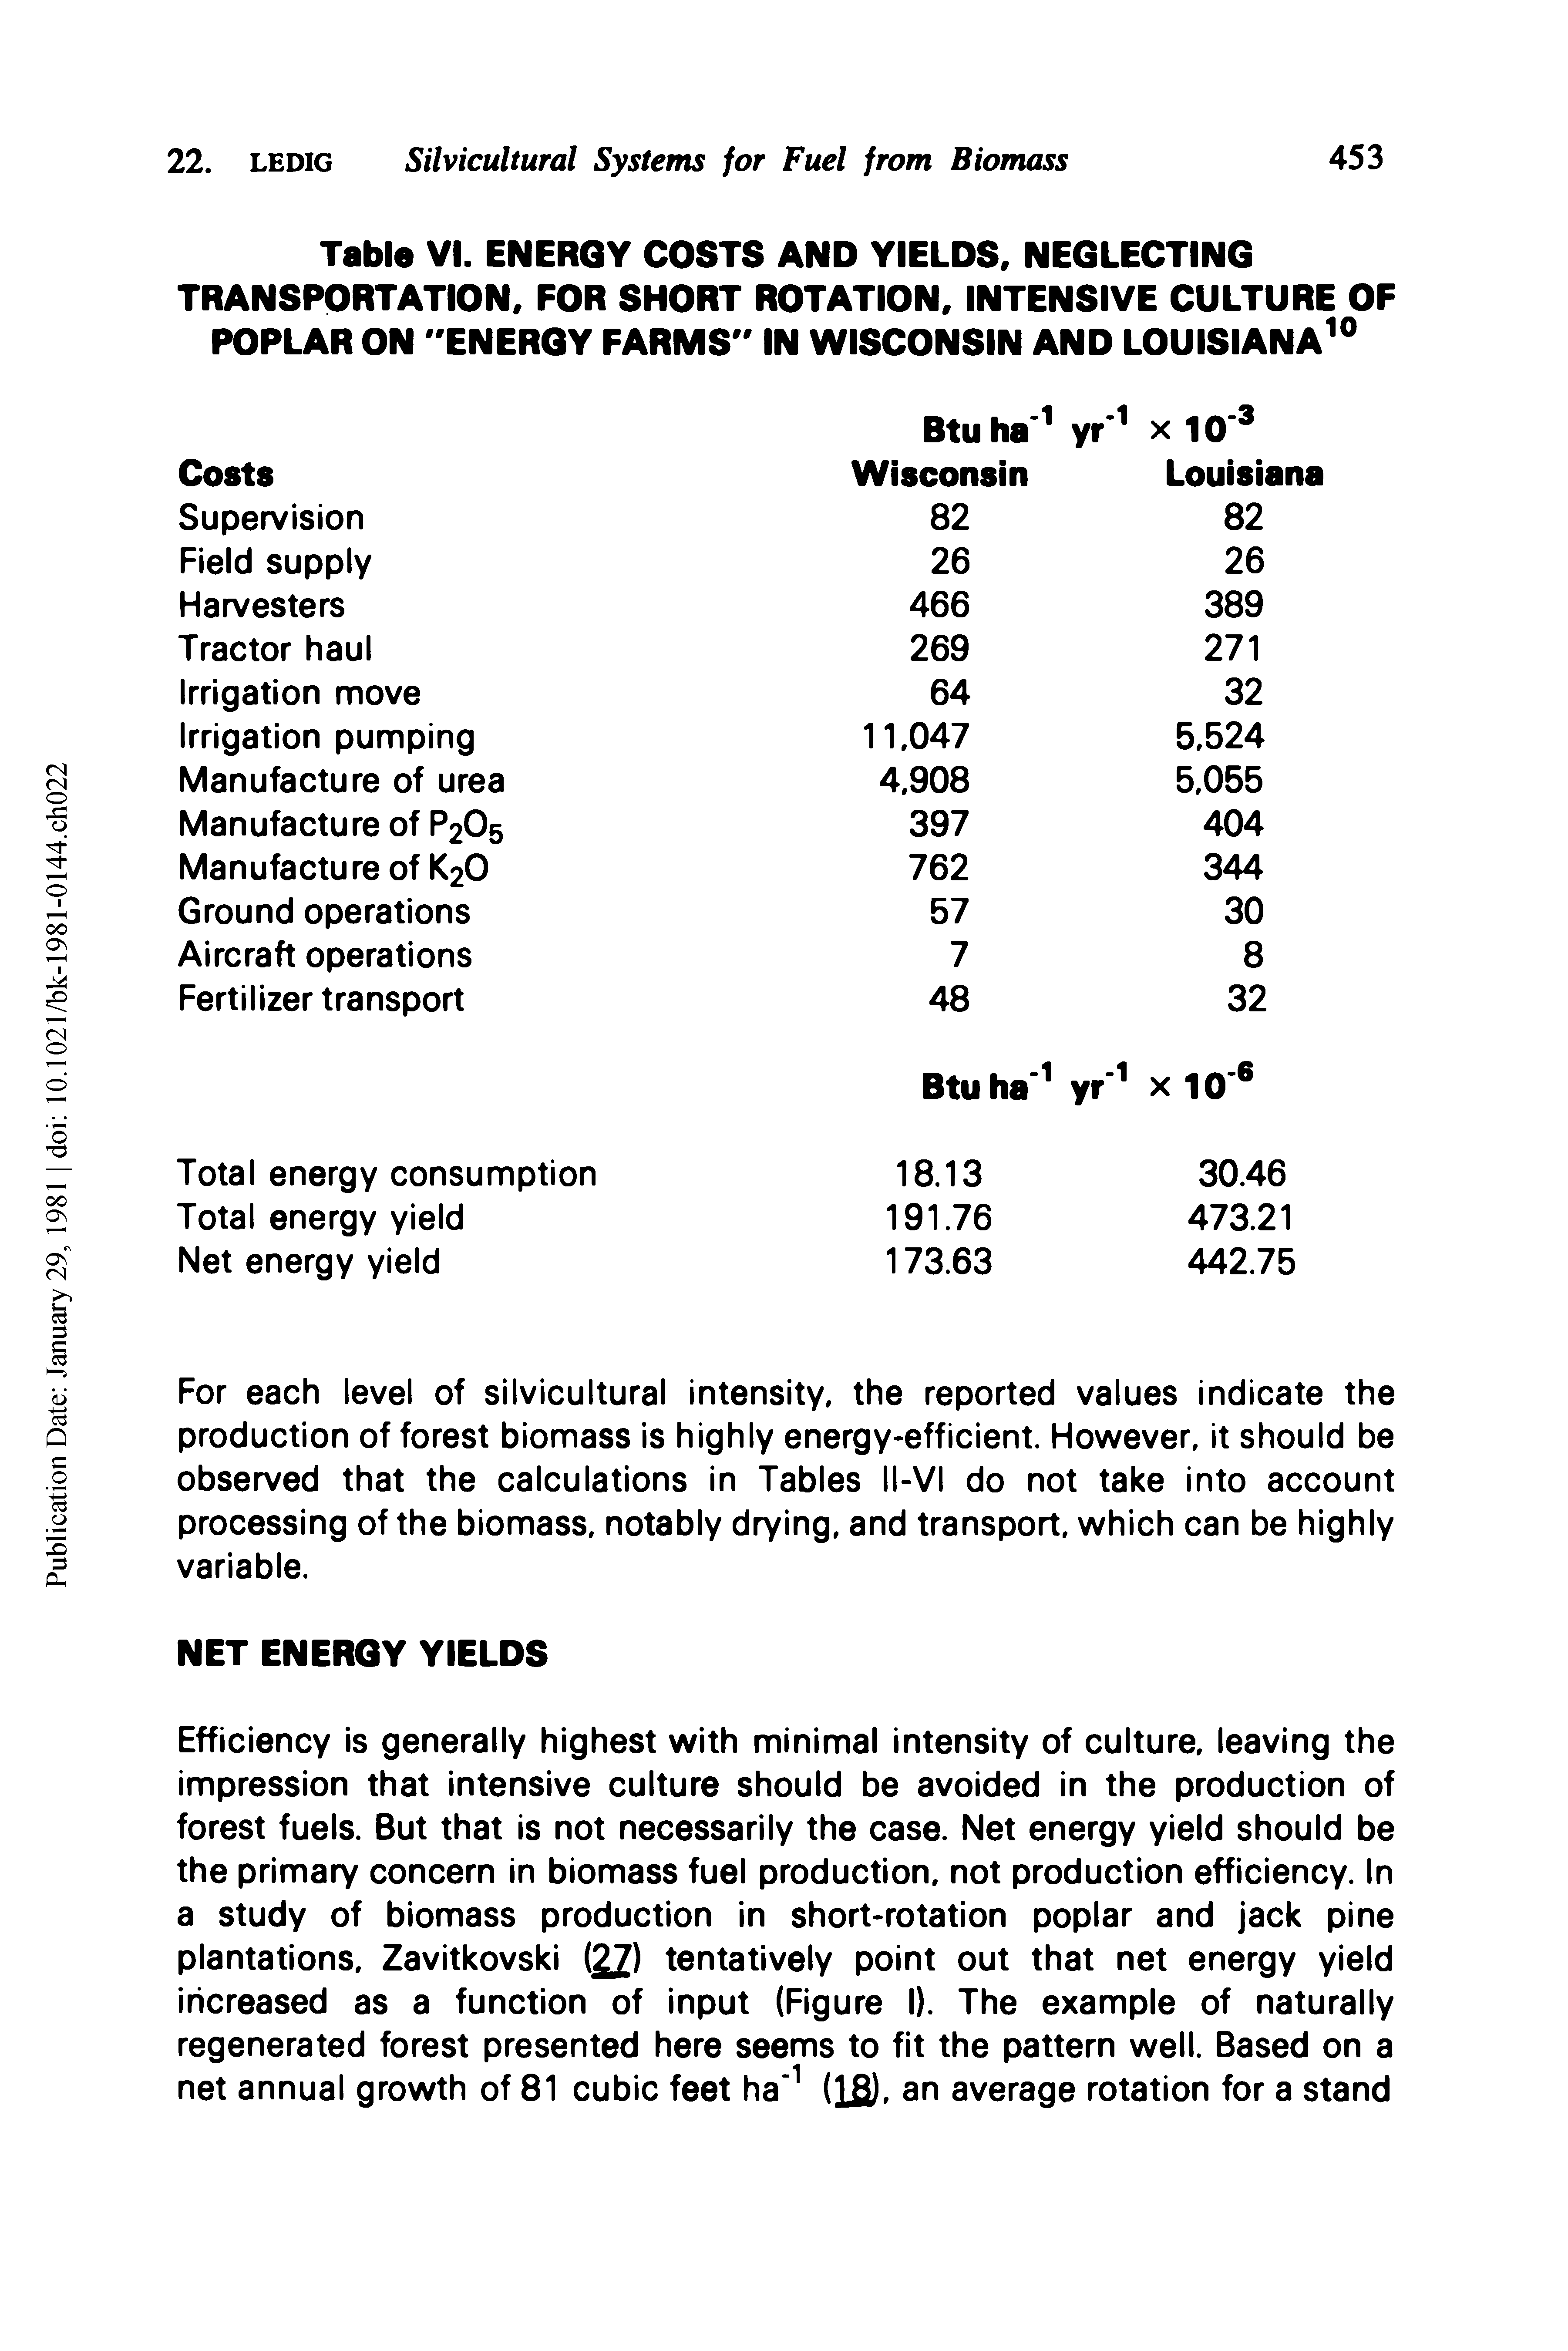 Table VI. ENERGY COSTS AND YIELDS, NEGLECTING TRANSPORTATION, FOR SHORT ROTATION, INTENSIVE CULTURE OF POPLAR ON "ENERGY FARMS" IN WISCONSIN AND LOUISIANA ...